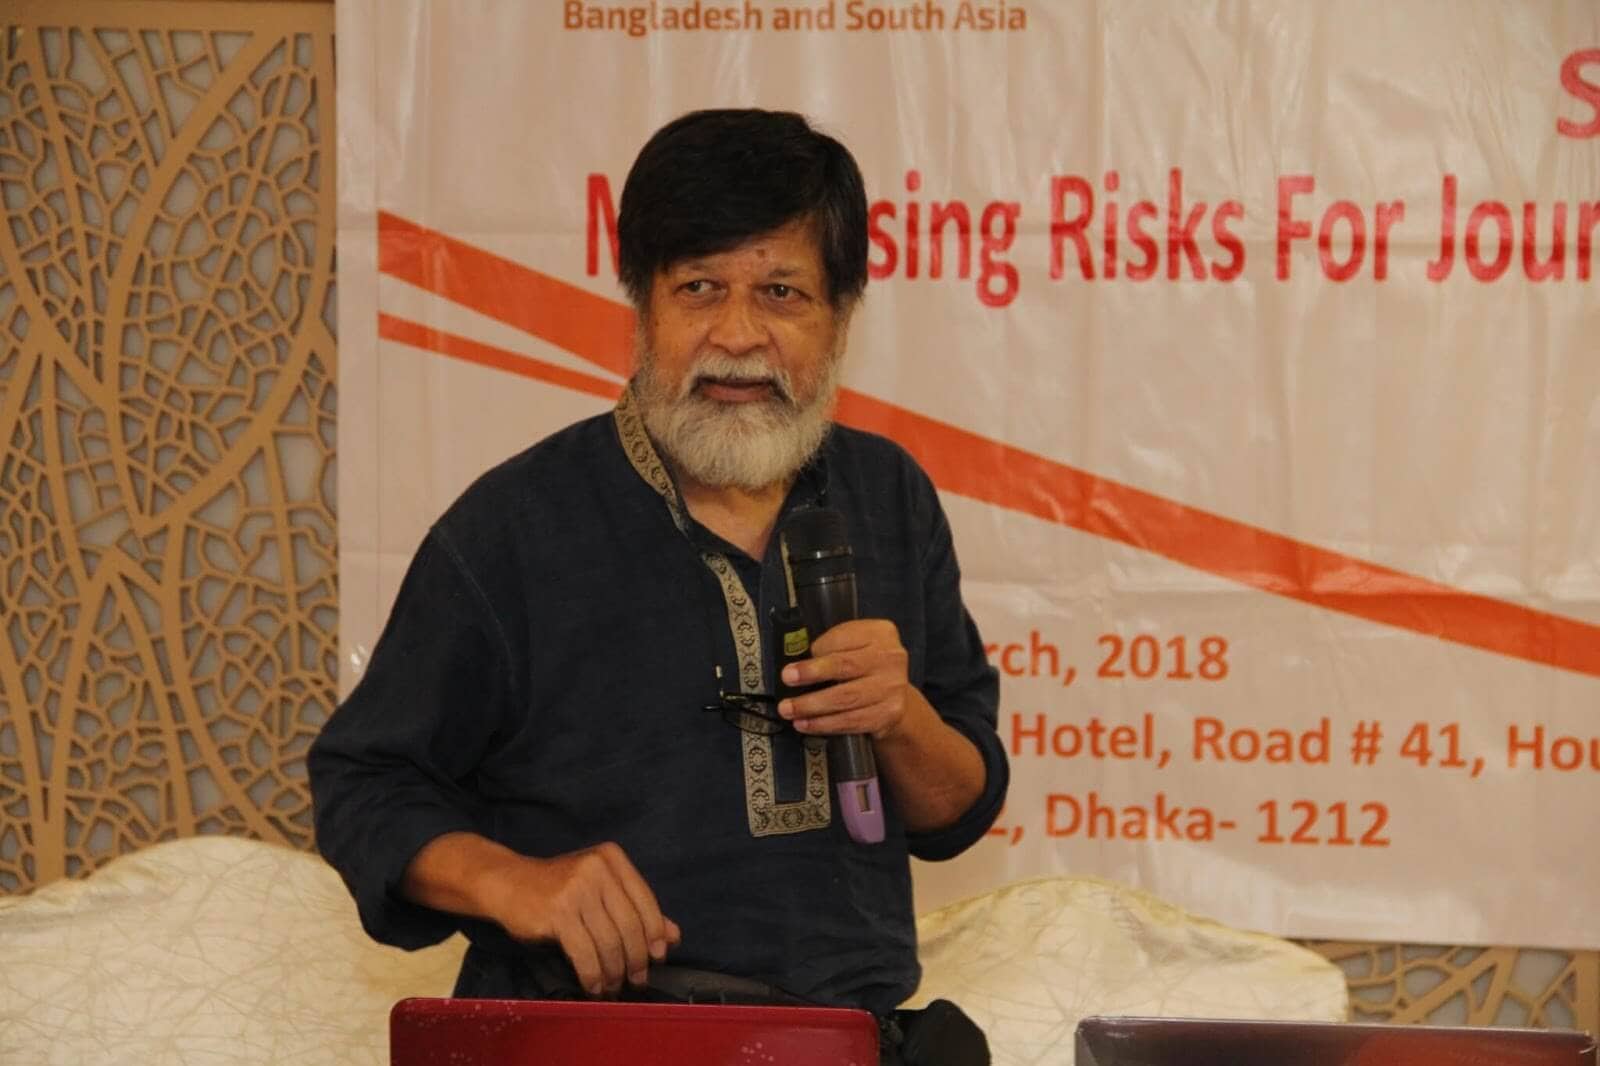 Bangladesh: Release photojournalist Shahidul Alam and stop violations to free expression - Civic Space